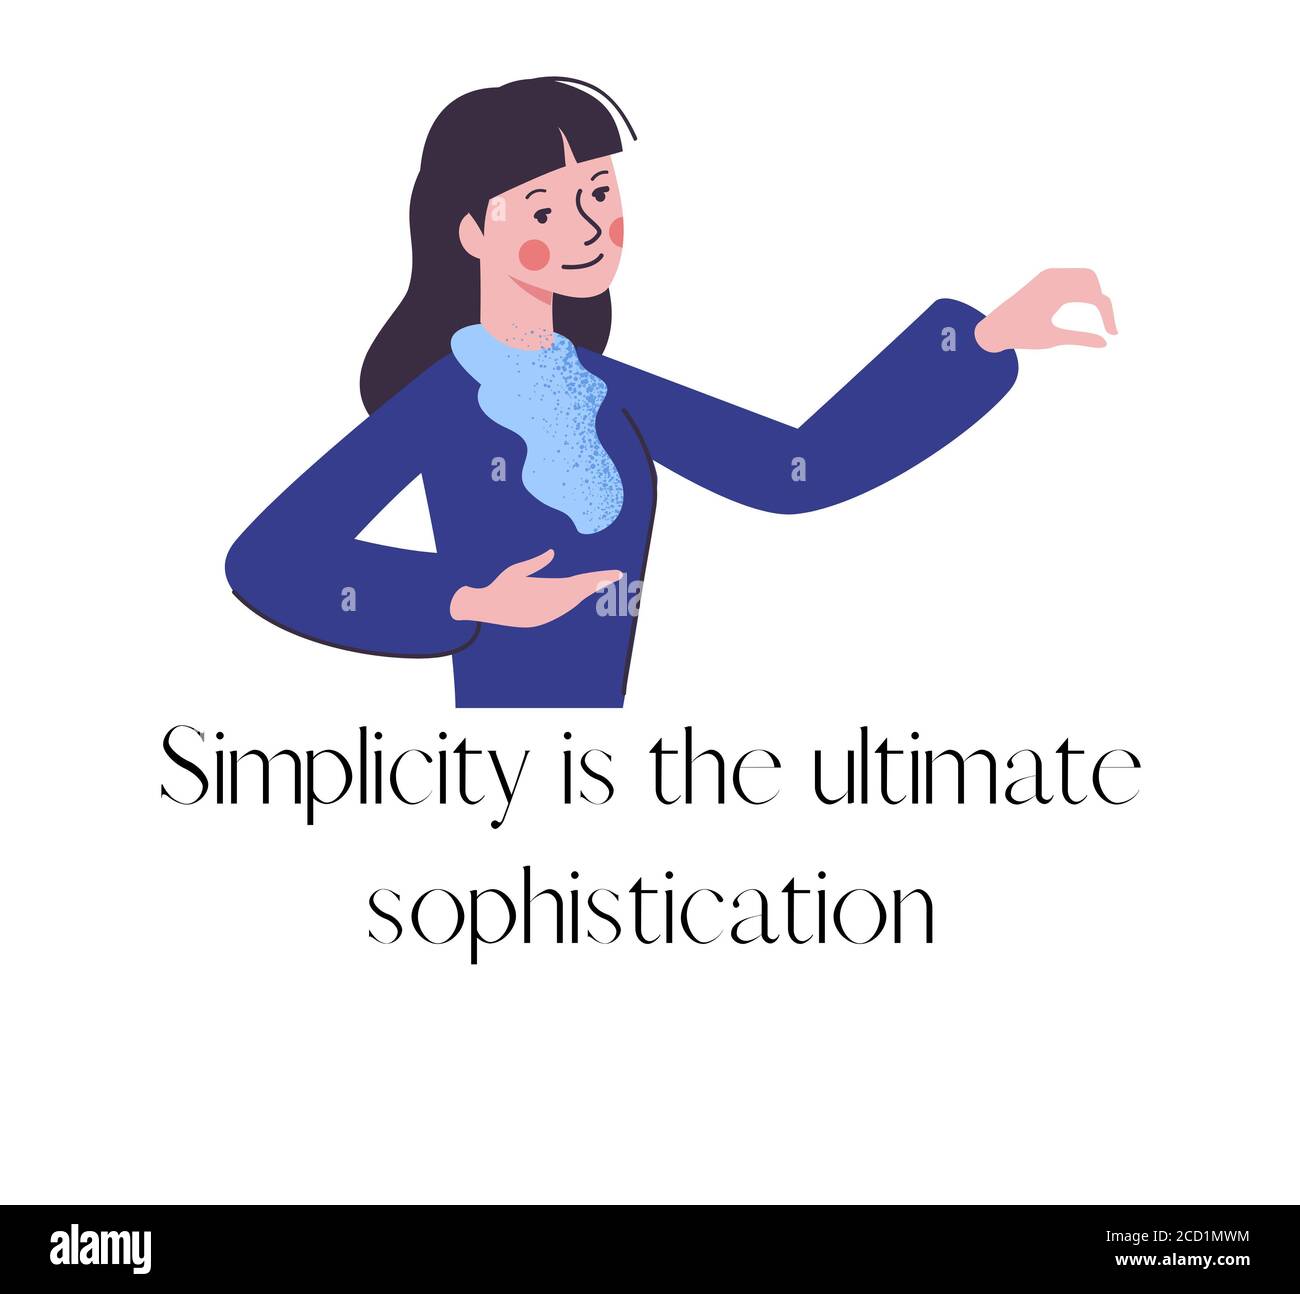 Simplicity is the ultimate sophistication Stock Photo